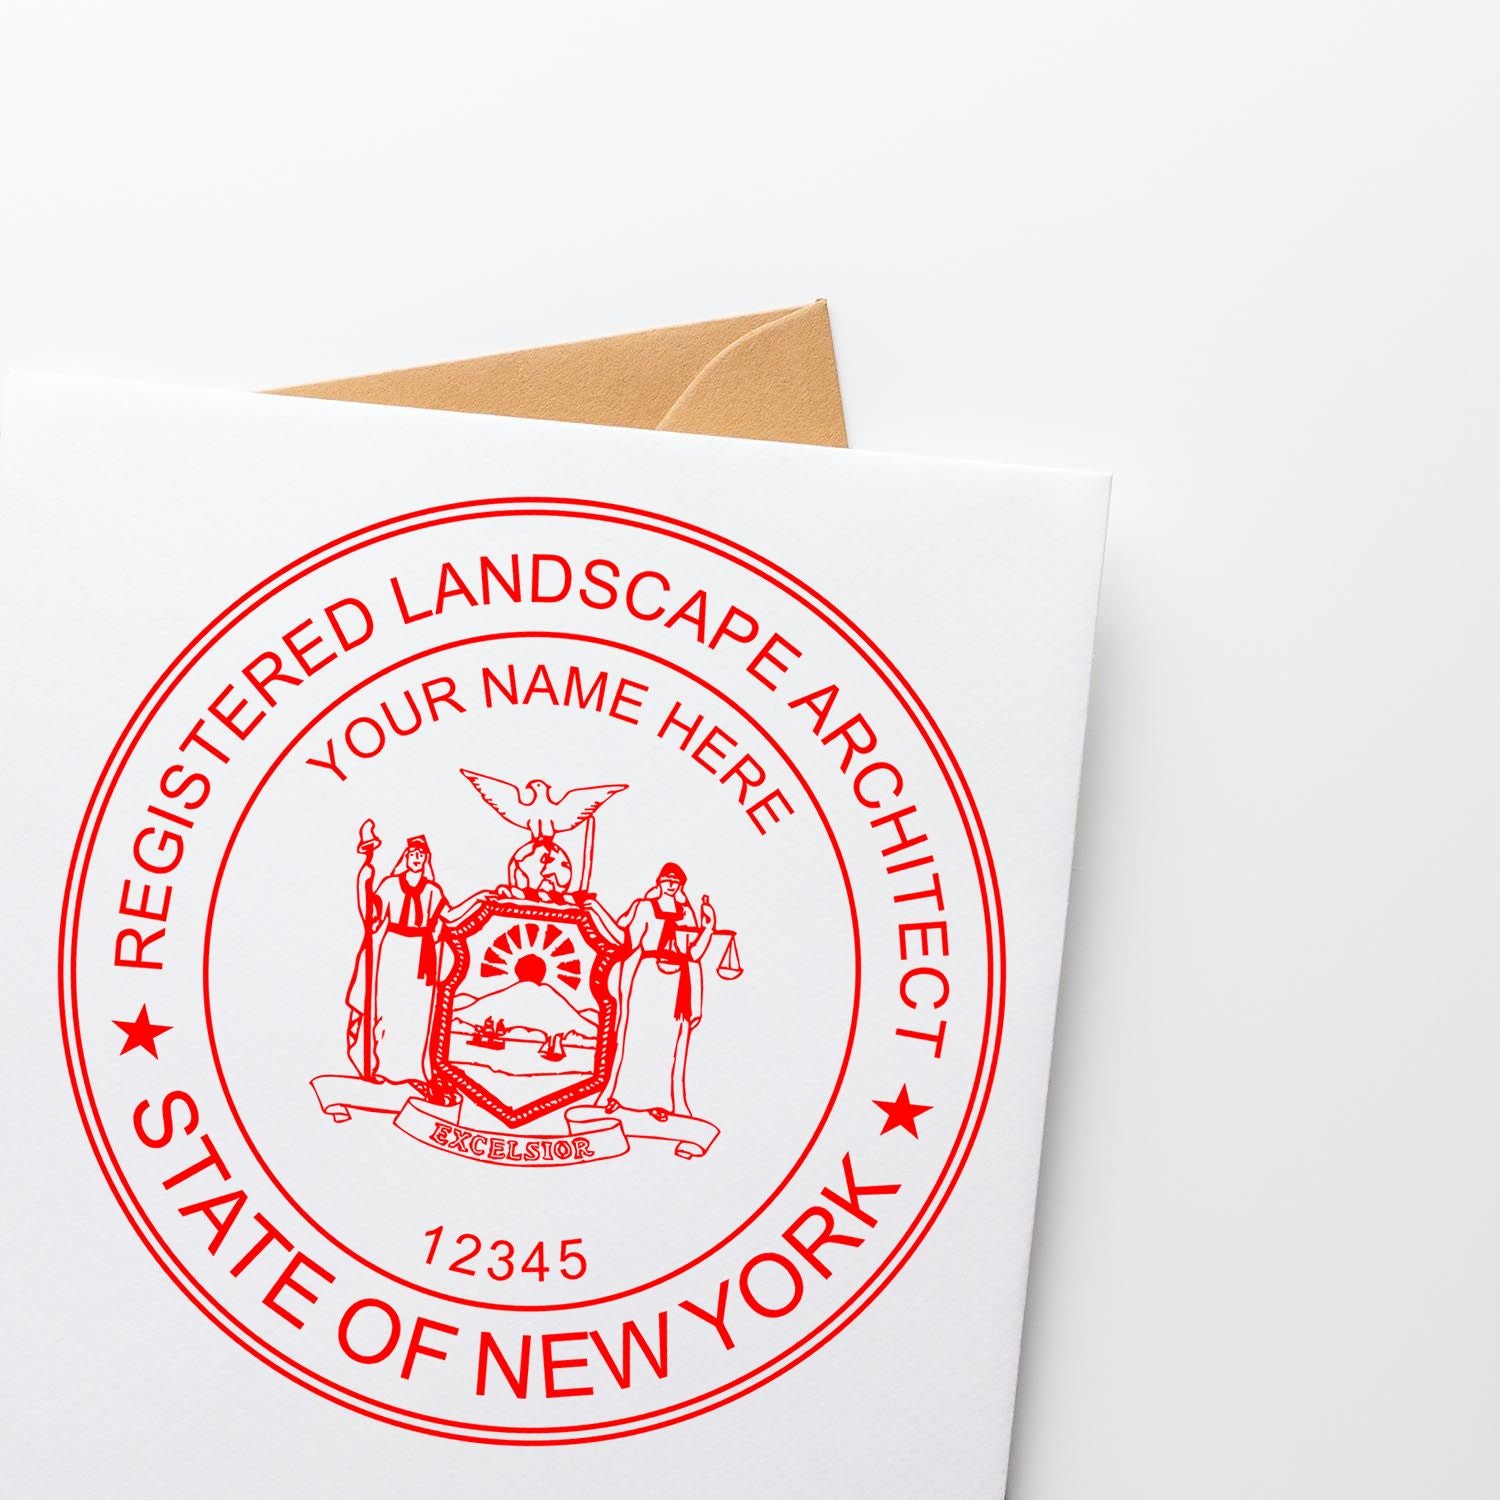 The main image for the New York Landscape Architectural Seal Stamp depicting a sample of the imprint and electronic files